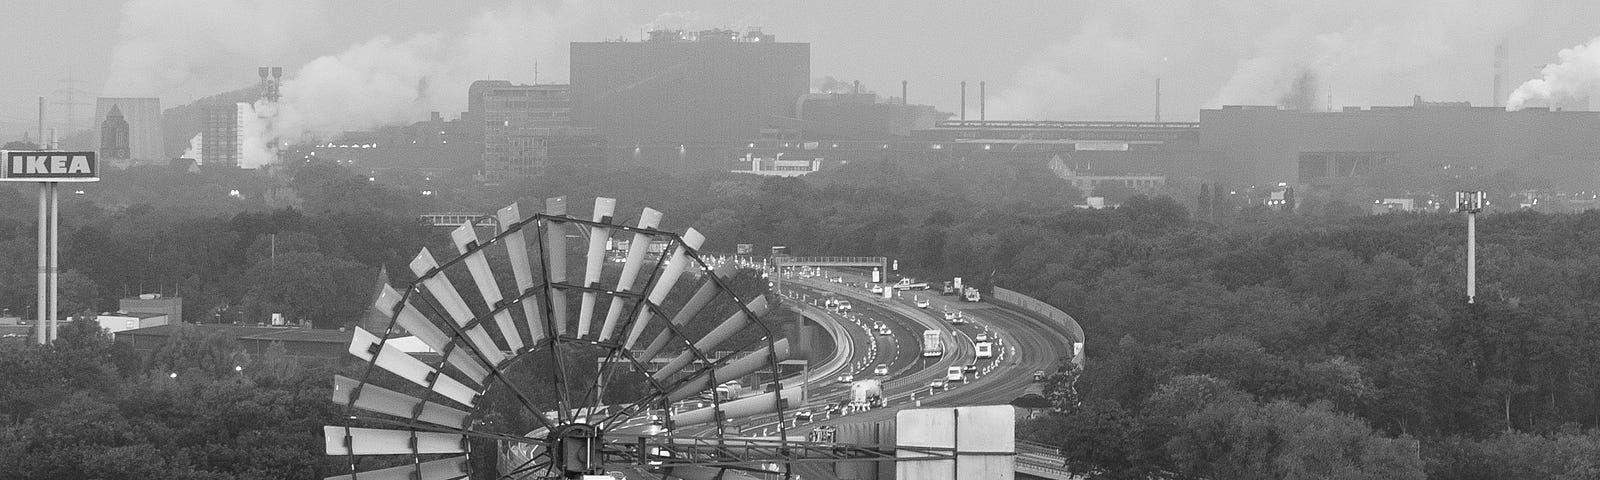 Early morning traffic on the nearby motorway as seen from the Landschaftspark blast furnace. Duisburg, Germany, September 30, 2023.